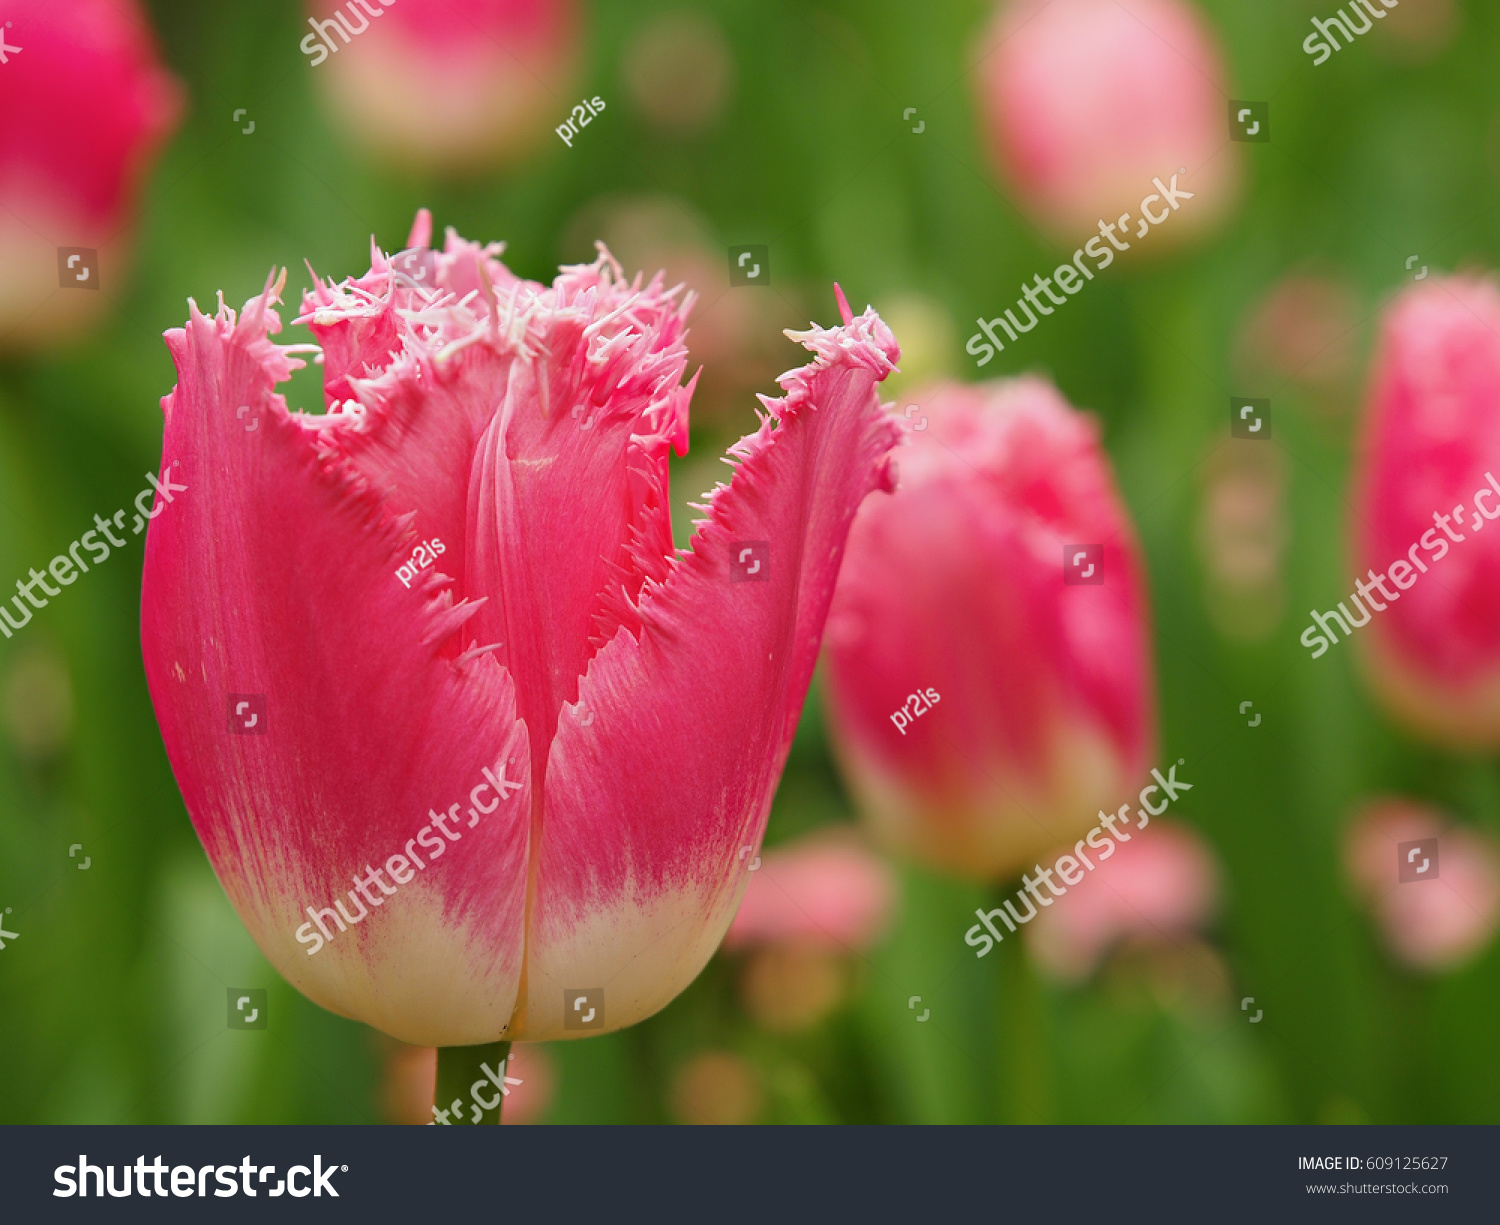 Pink Fringed Fancy Frills Tulip Blossoming Nature Stock Image 609125627